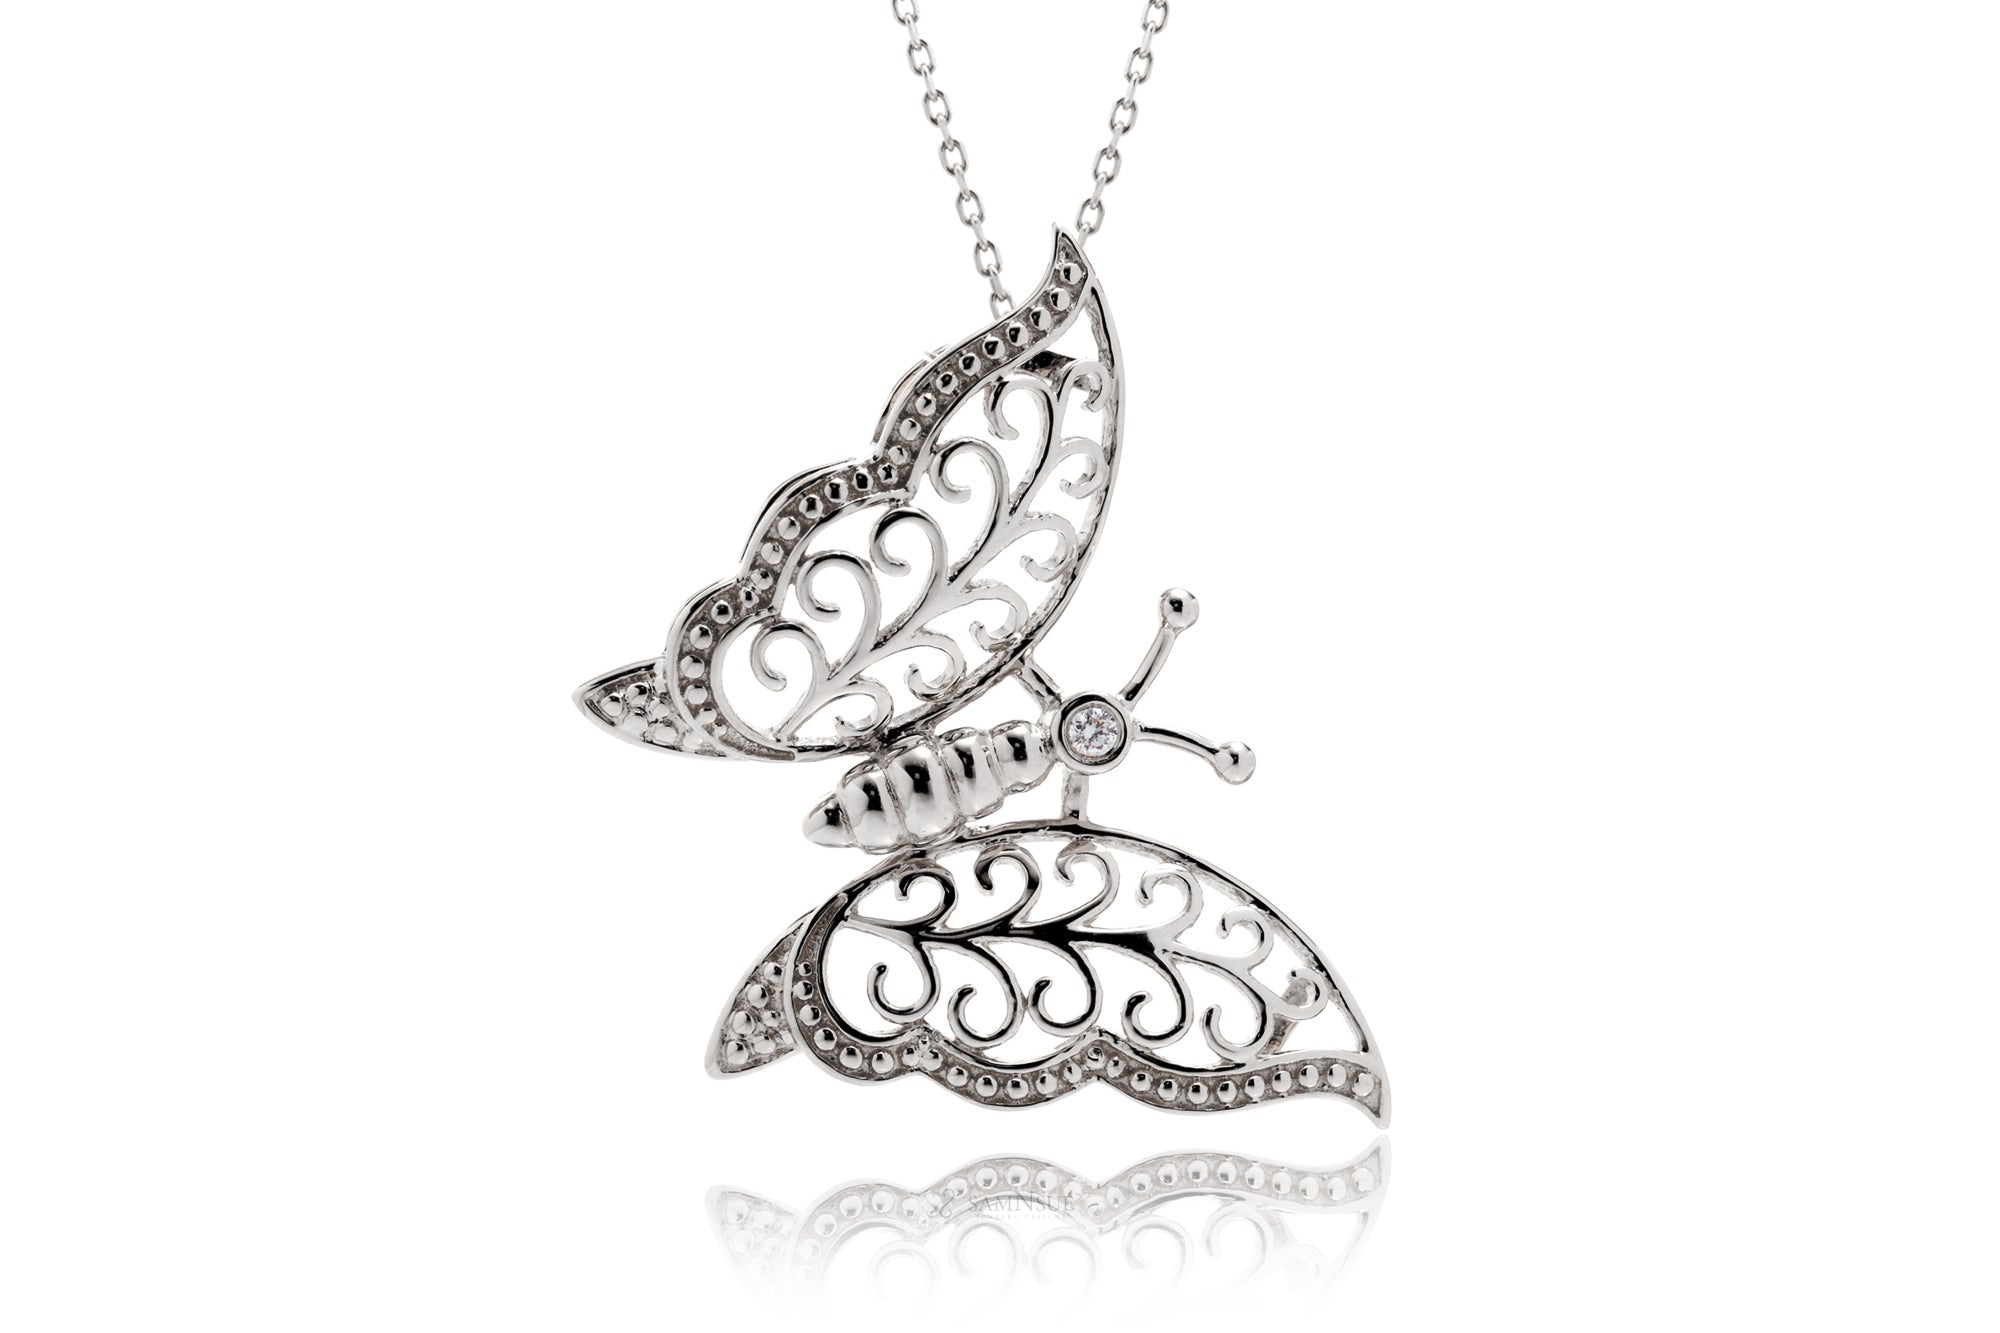 The Monarch Butterfly Pendant